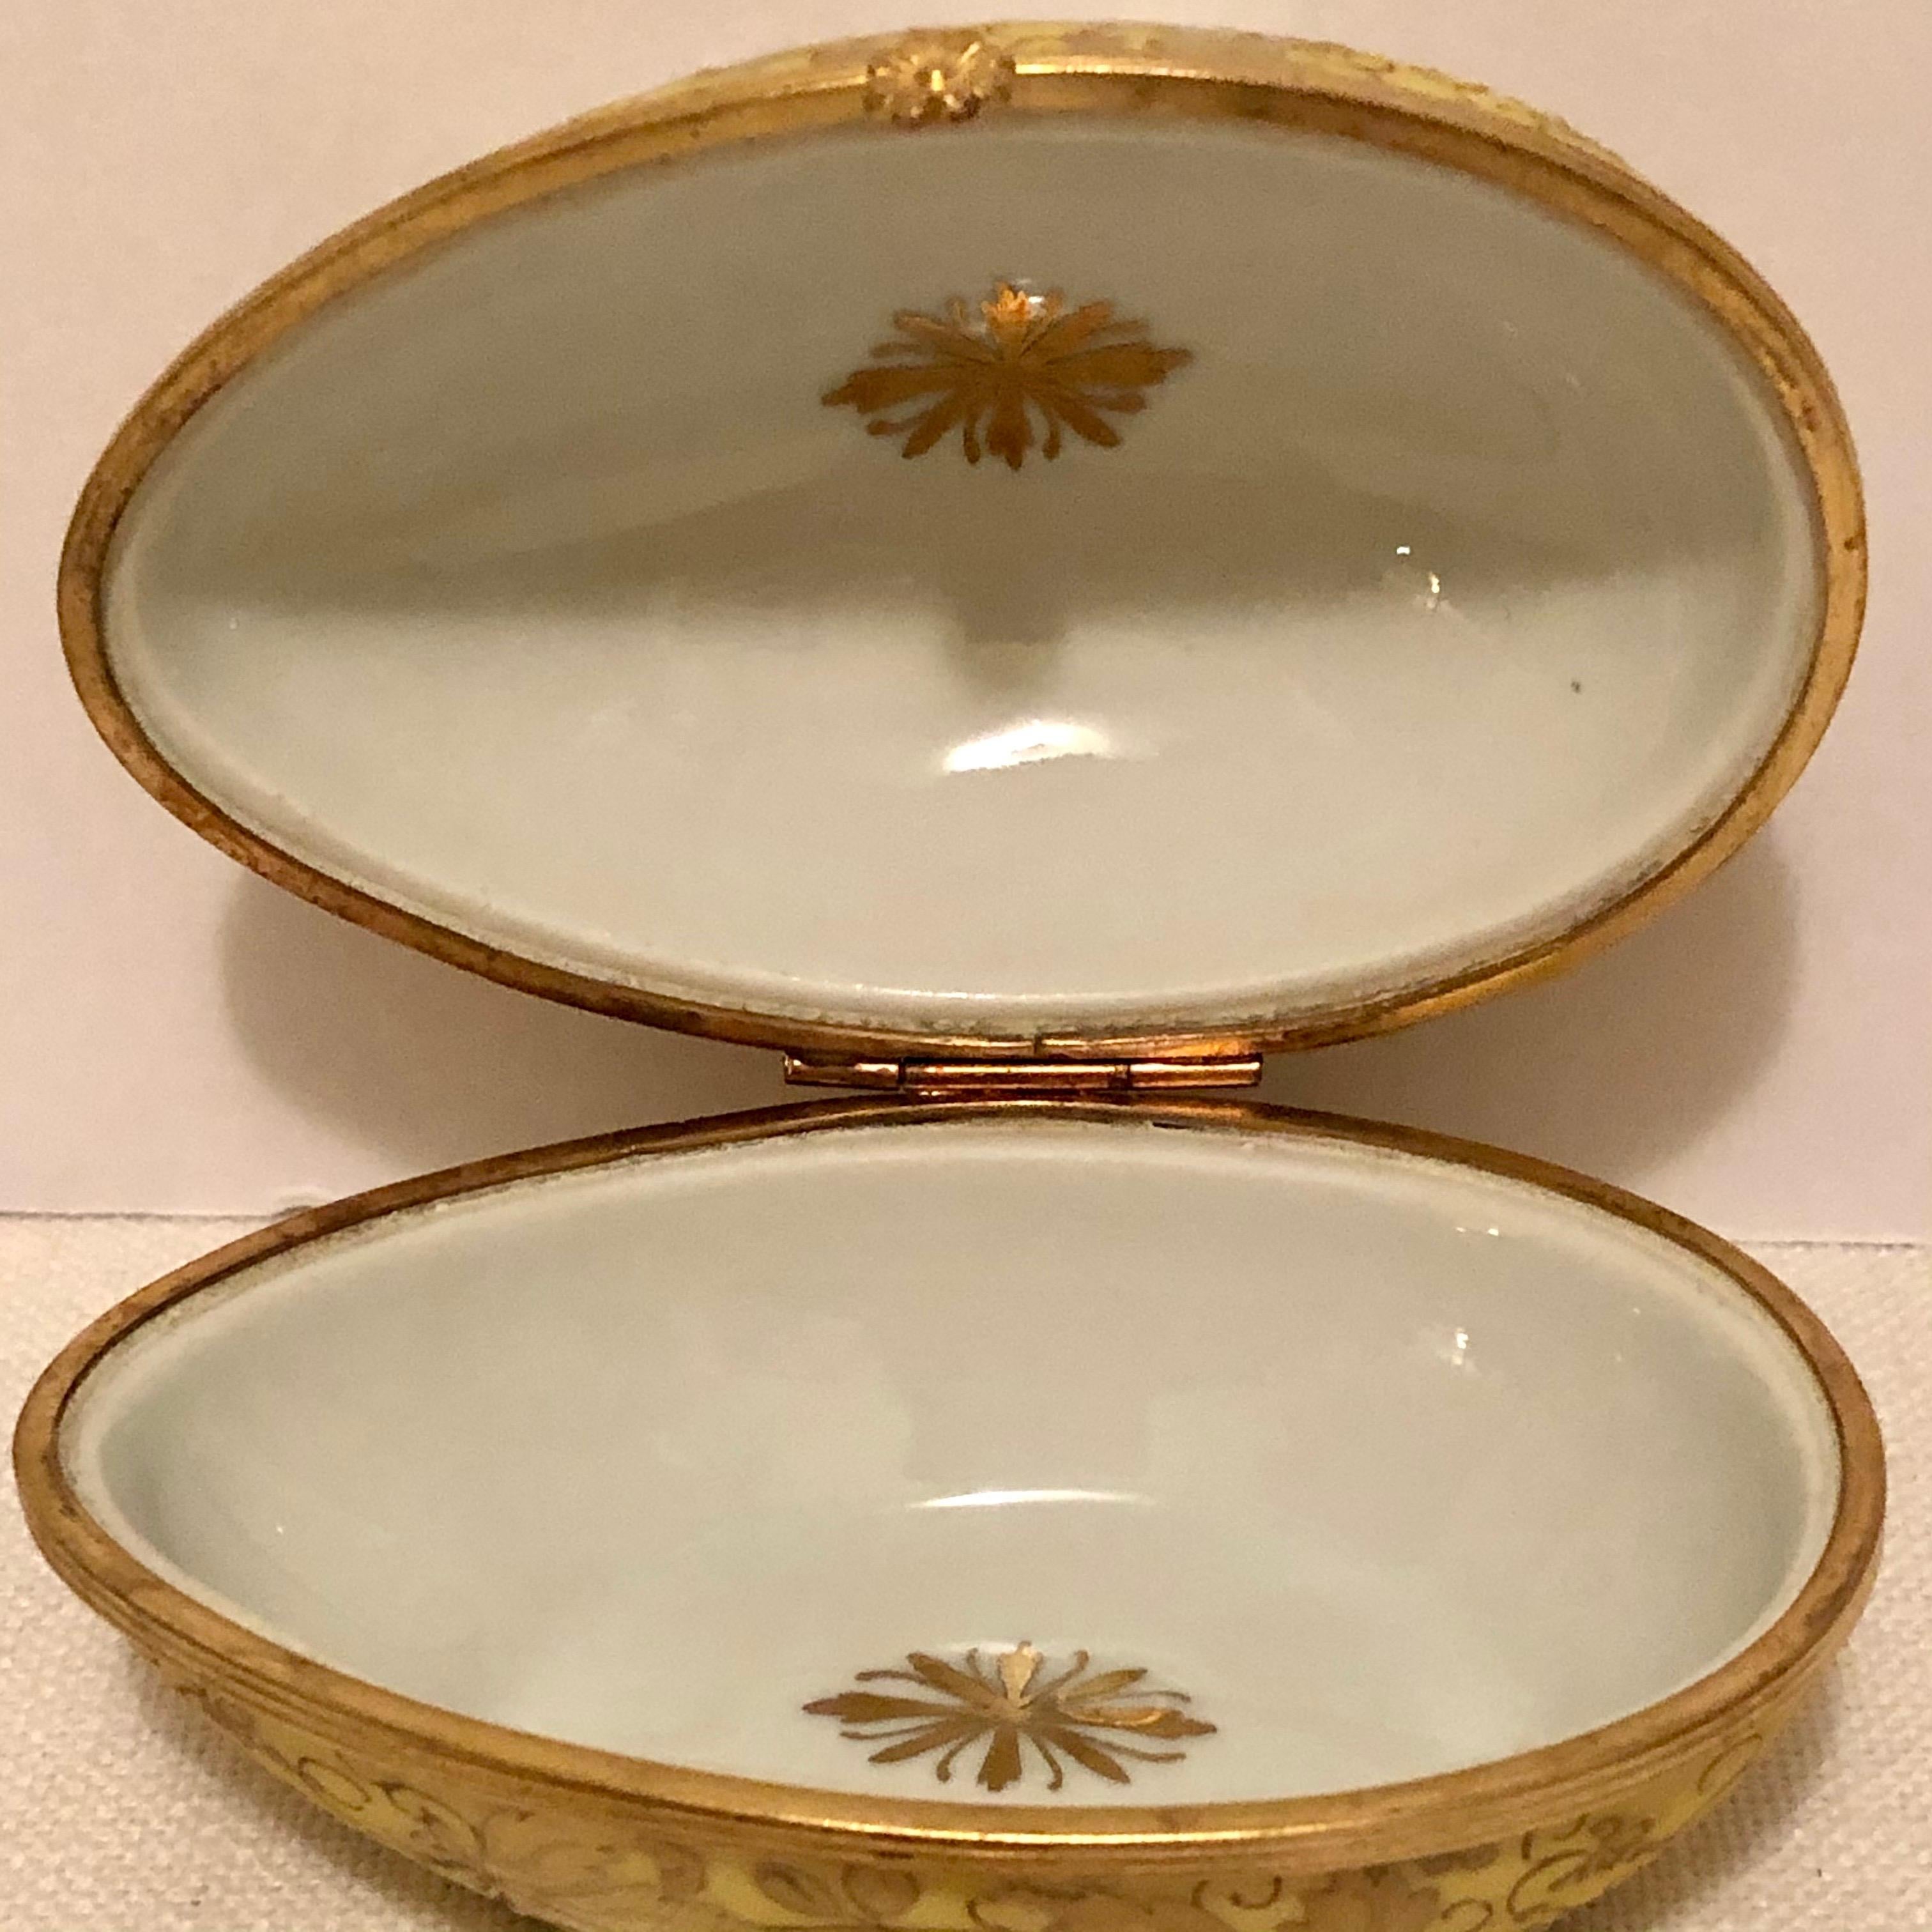 Mid-20th Century Le Tallec Porcelain Egg Shaped Box Decorated with Exquisite Raised Gilding